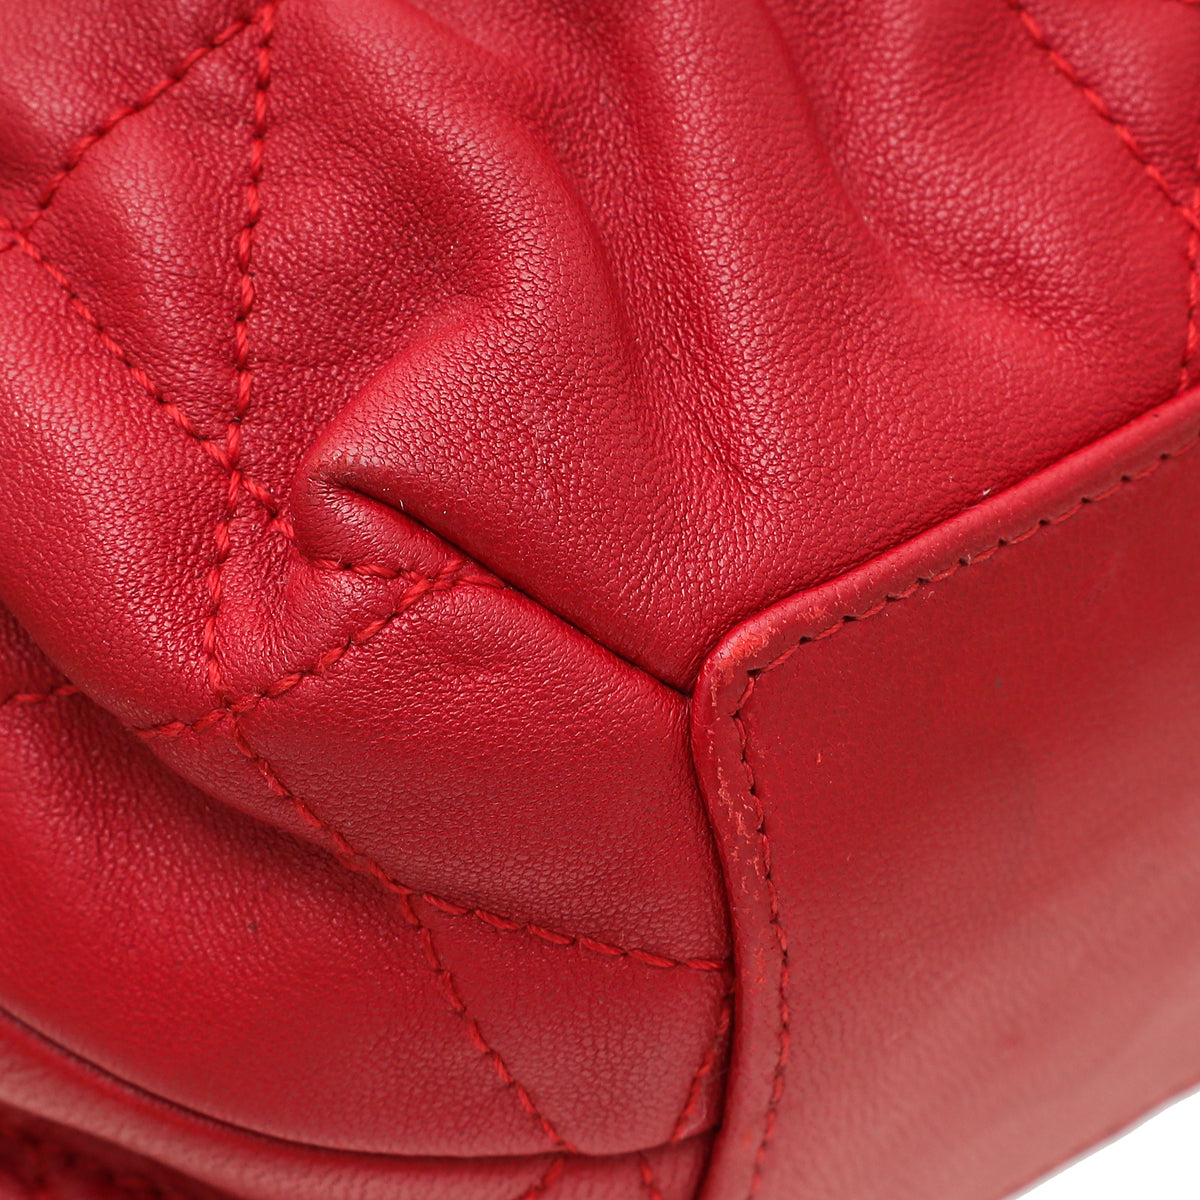 Christian Dior Red Gaufre Cannage Delices Mini Bag